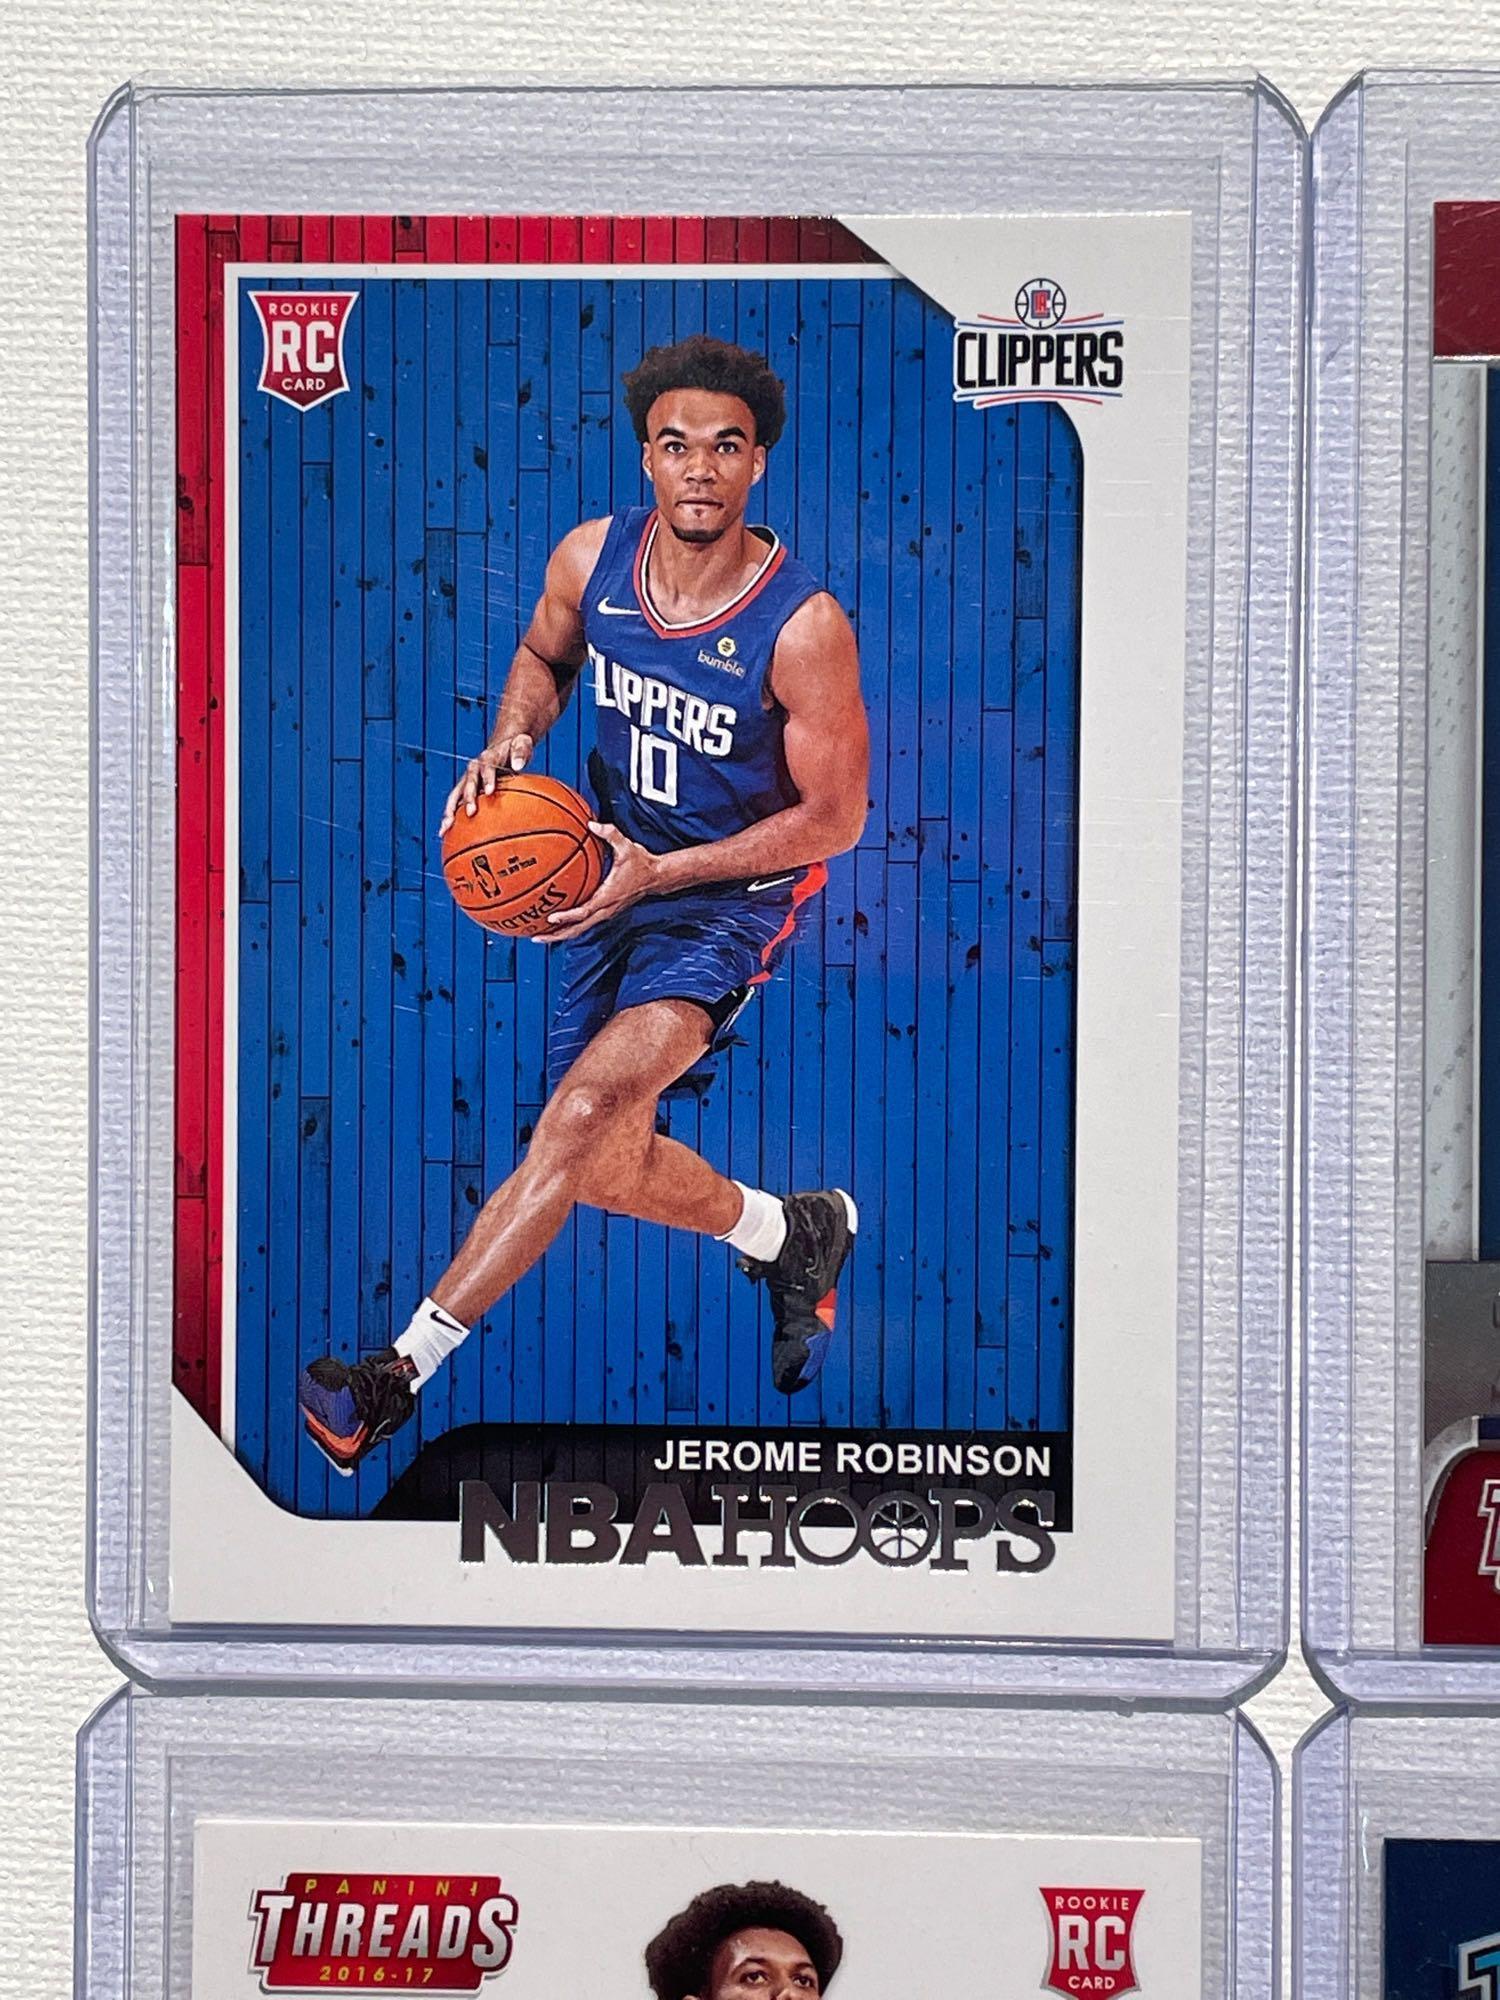 Jerome Robinson, DeAndre Bembry, Timothy Luwawu-Cabarrot, and Zach Collins Rookie cards